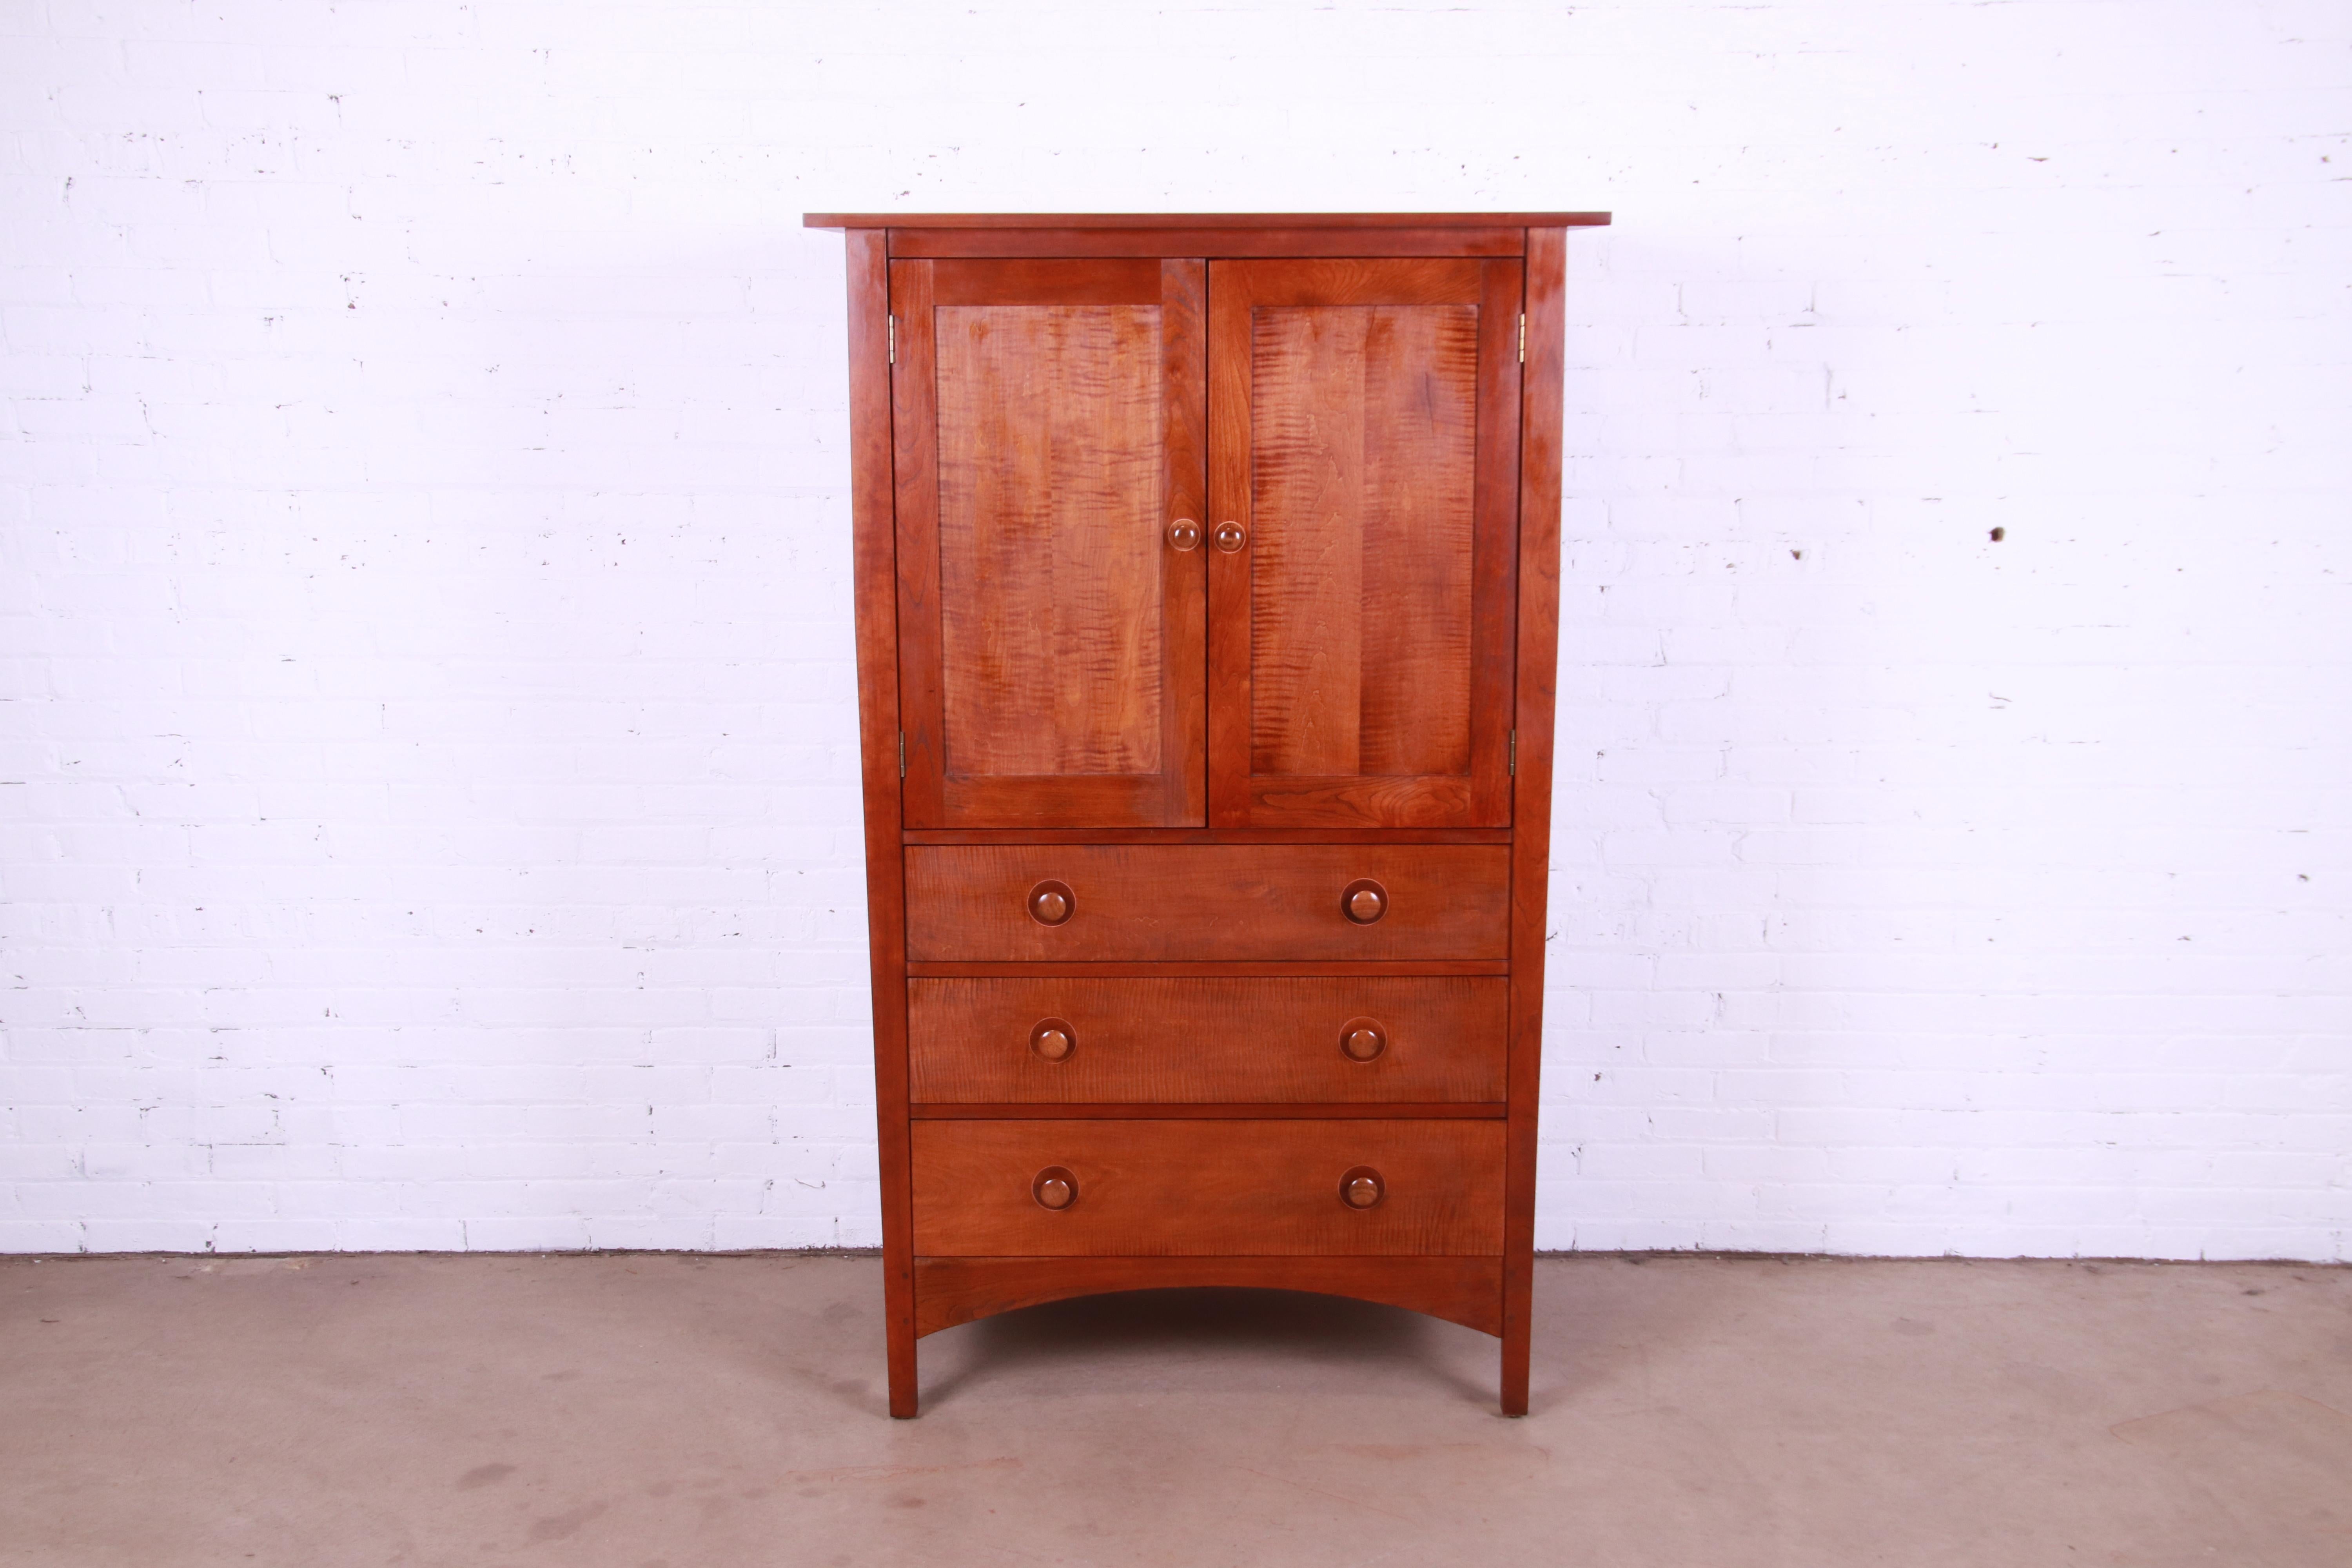 A gorgeous Mission or Arts & Crafts style armoire dresser or gentleman's chest

By Stickley, 